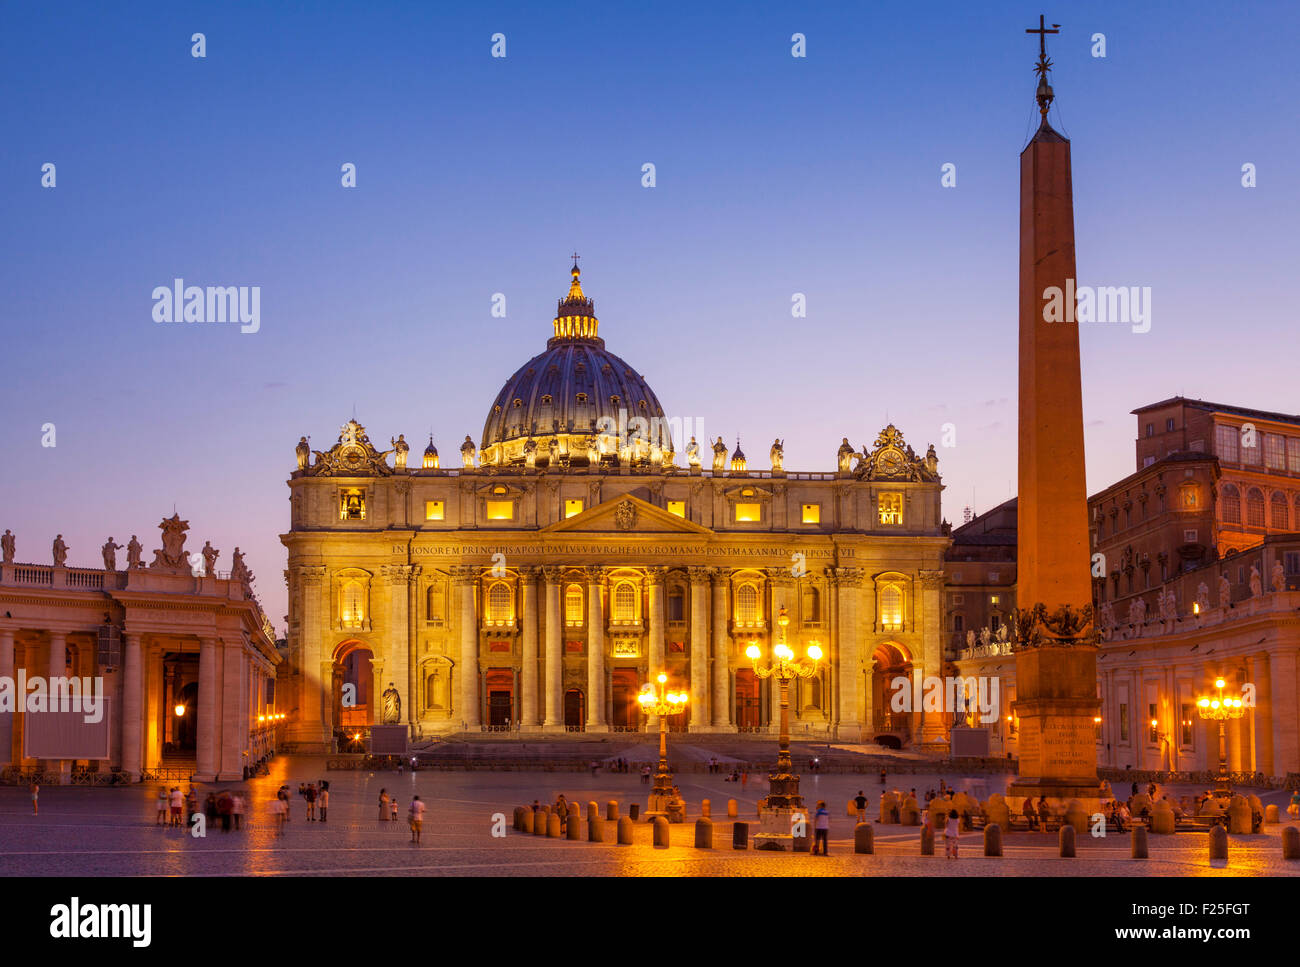 St Peters Square and St Peters Basilica Vatican City at night Roma Rome Lazio Italy EU Europe Stock Photo